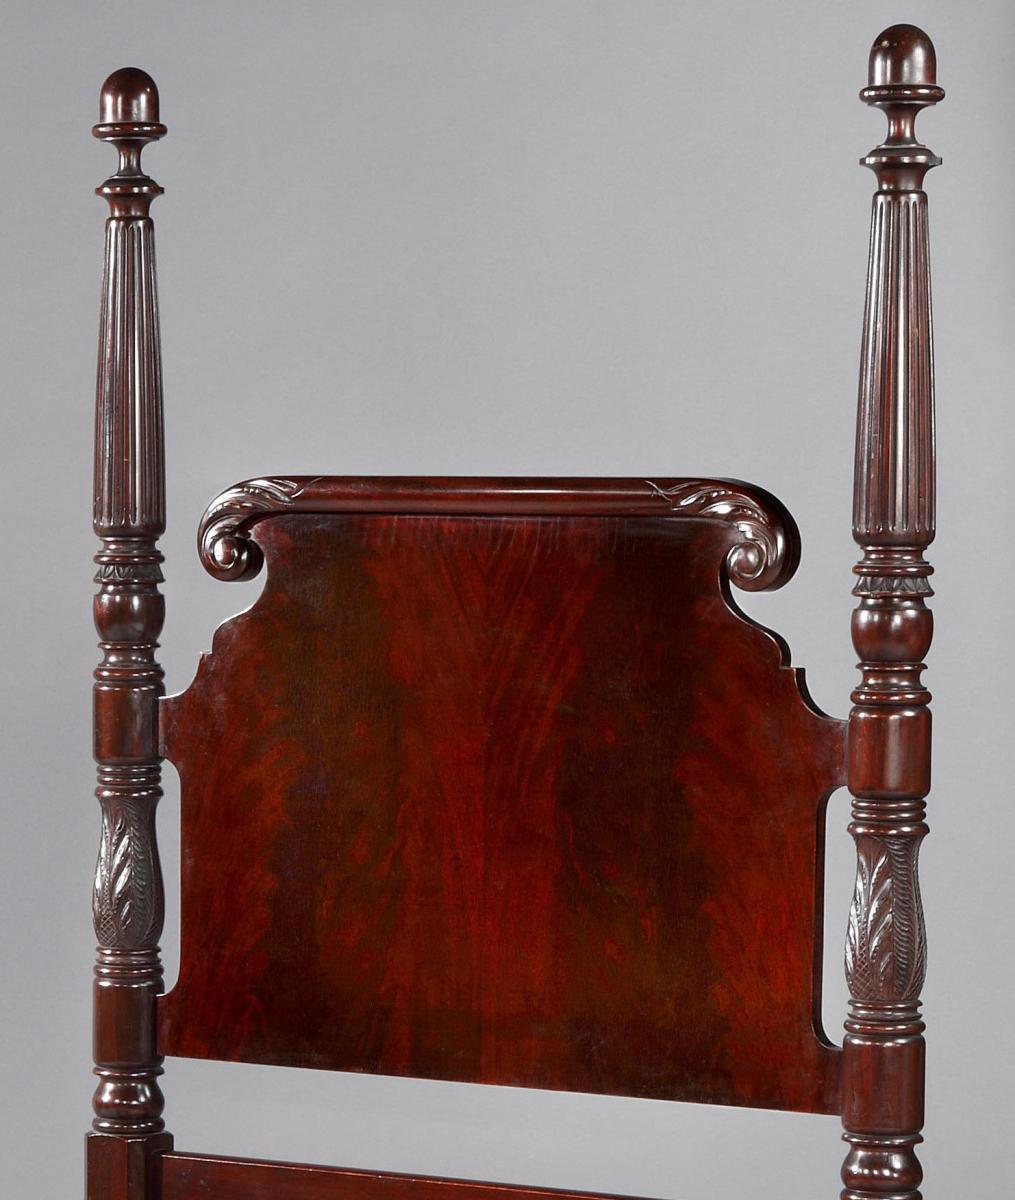 A pair of 19th century, mahogany, ‘antiquarian’, half-tester beds